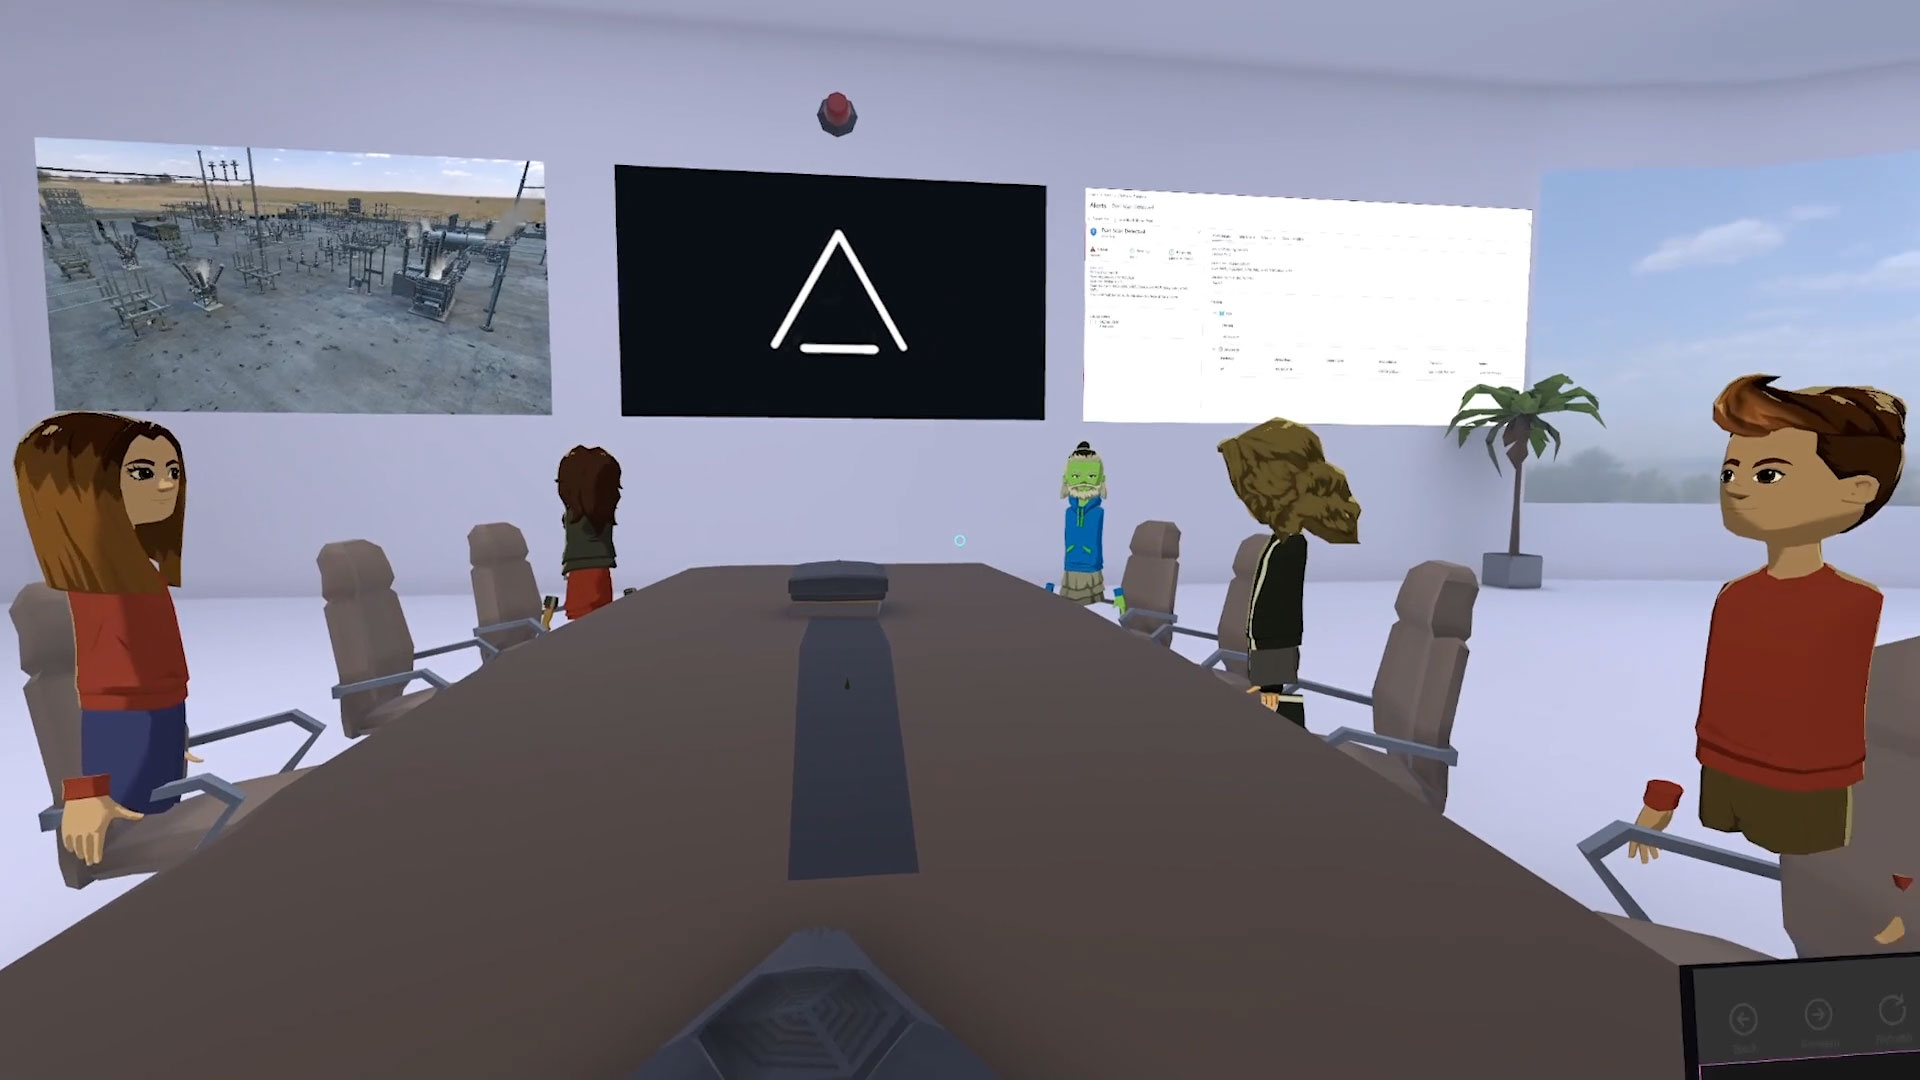 Avangrid discusses how their Cyber Security Simulation in Metaverse project will help them update and improve their proactive defense strategies.